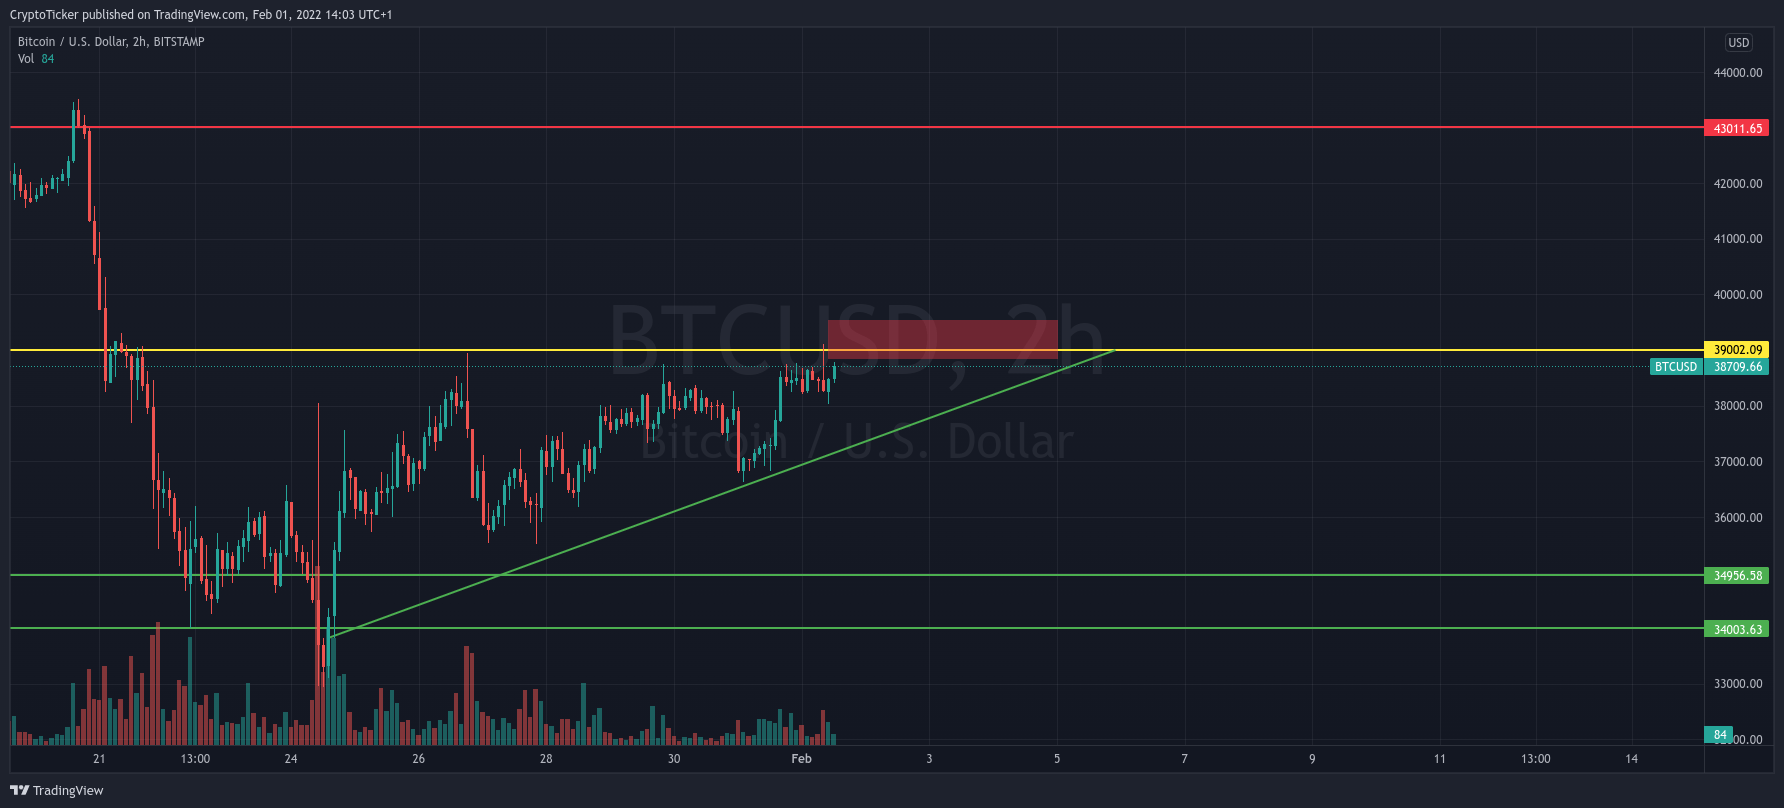 BTC/USD 2-hours chart showing Bitcoin price uptrend from its low